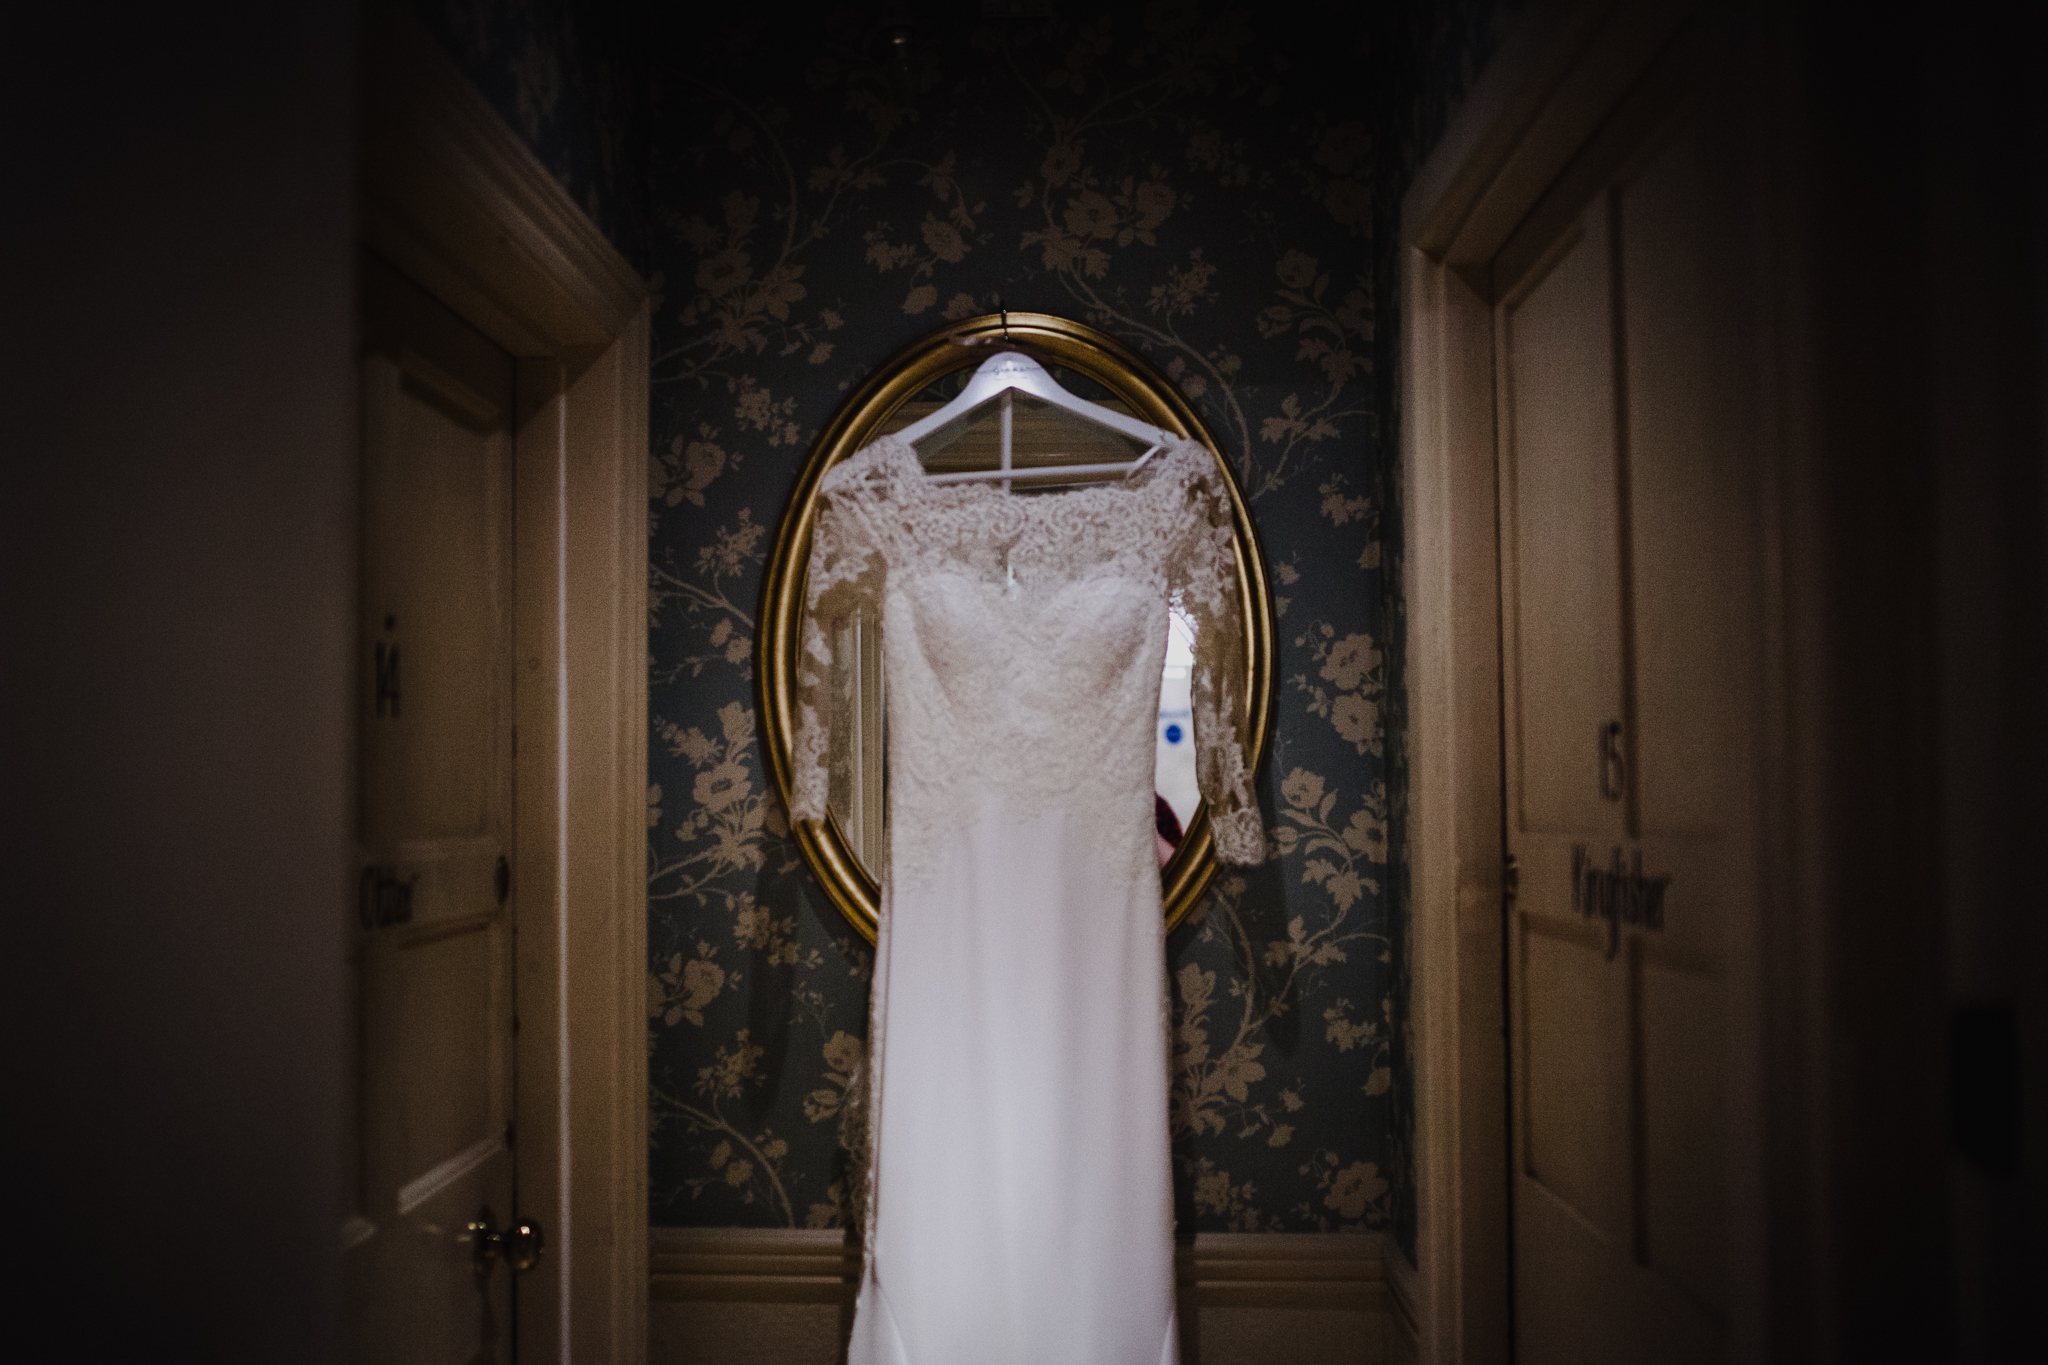 Copy of Wedding dress hanging on mirror with patterned wallpaper